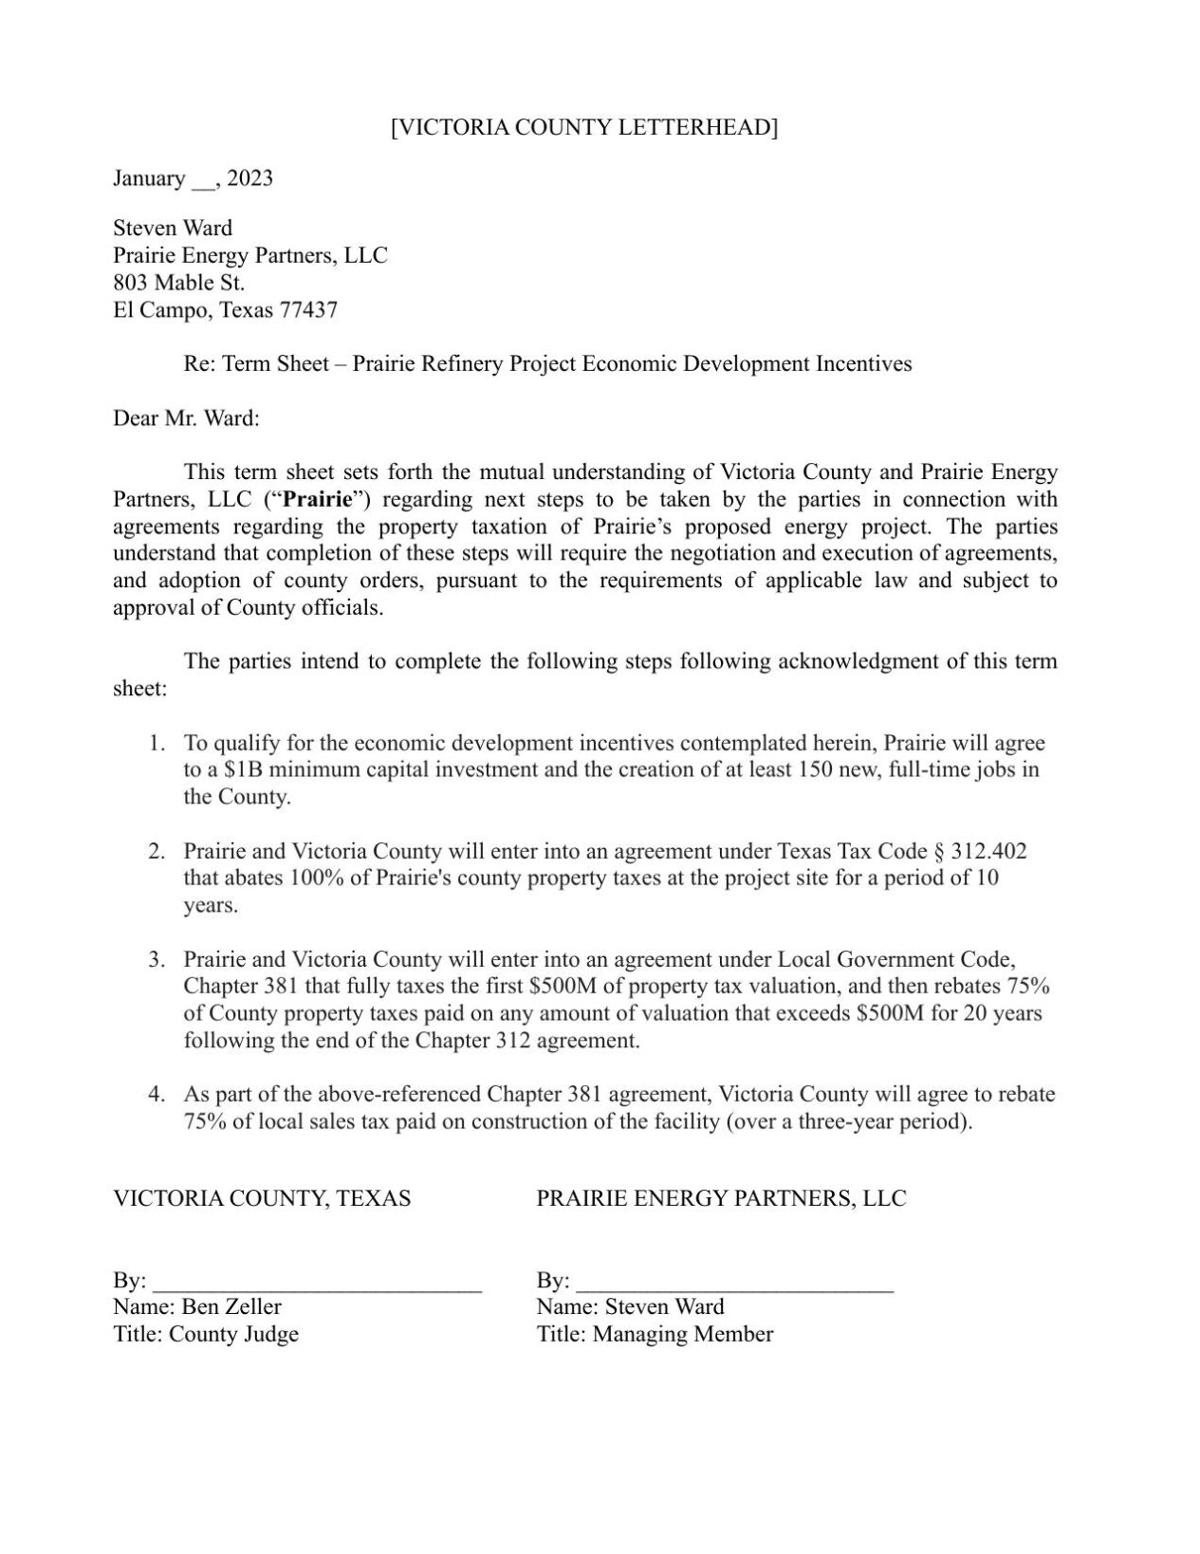 Prairie Energy Partners - Proposed Victoria County Term Sheet.docx.pdf